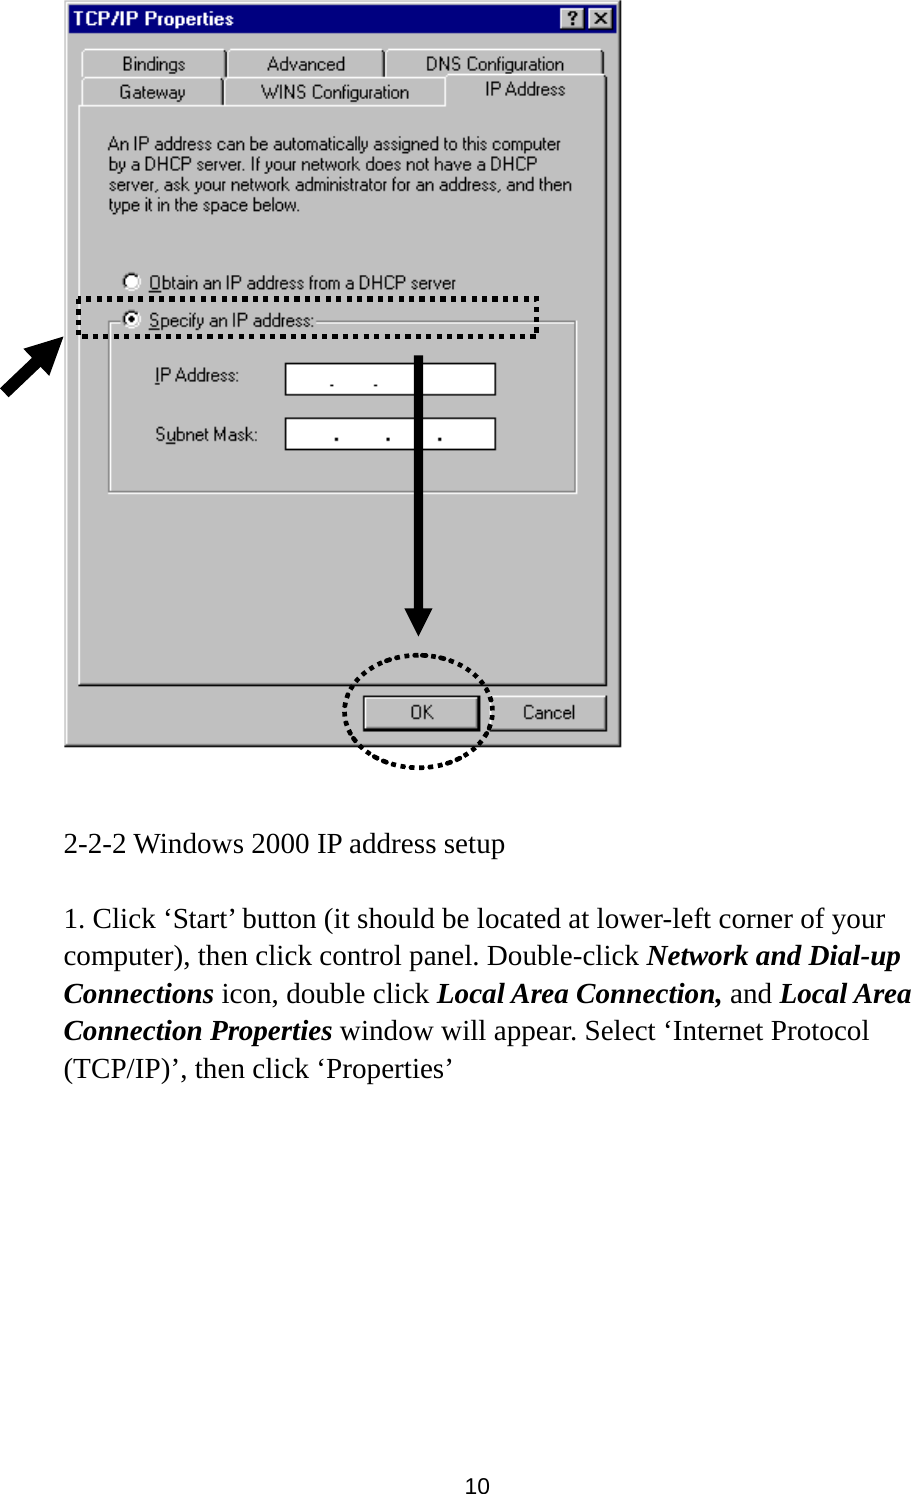  10    2-2-2 Windows 2000 IP address setup  1. Click ‘Start’ button (it should be located at lower-left corner of your computer), then click control panel. Double-click Network and Dial-up Connections icon, double click Local Area Connection, and Local Area Connection Properties window will appear. Select ‘Internet Protocol (TCP/IP)’, then click ‘Properties’    